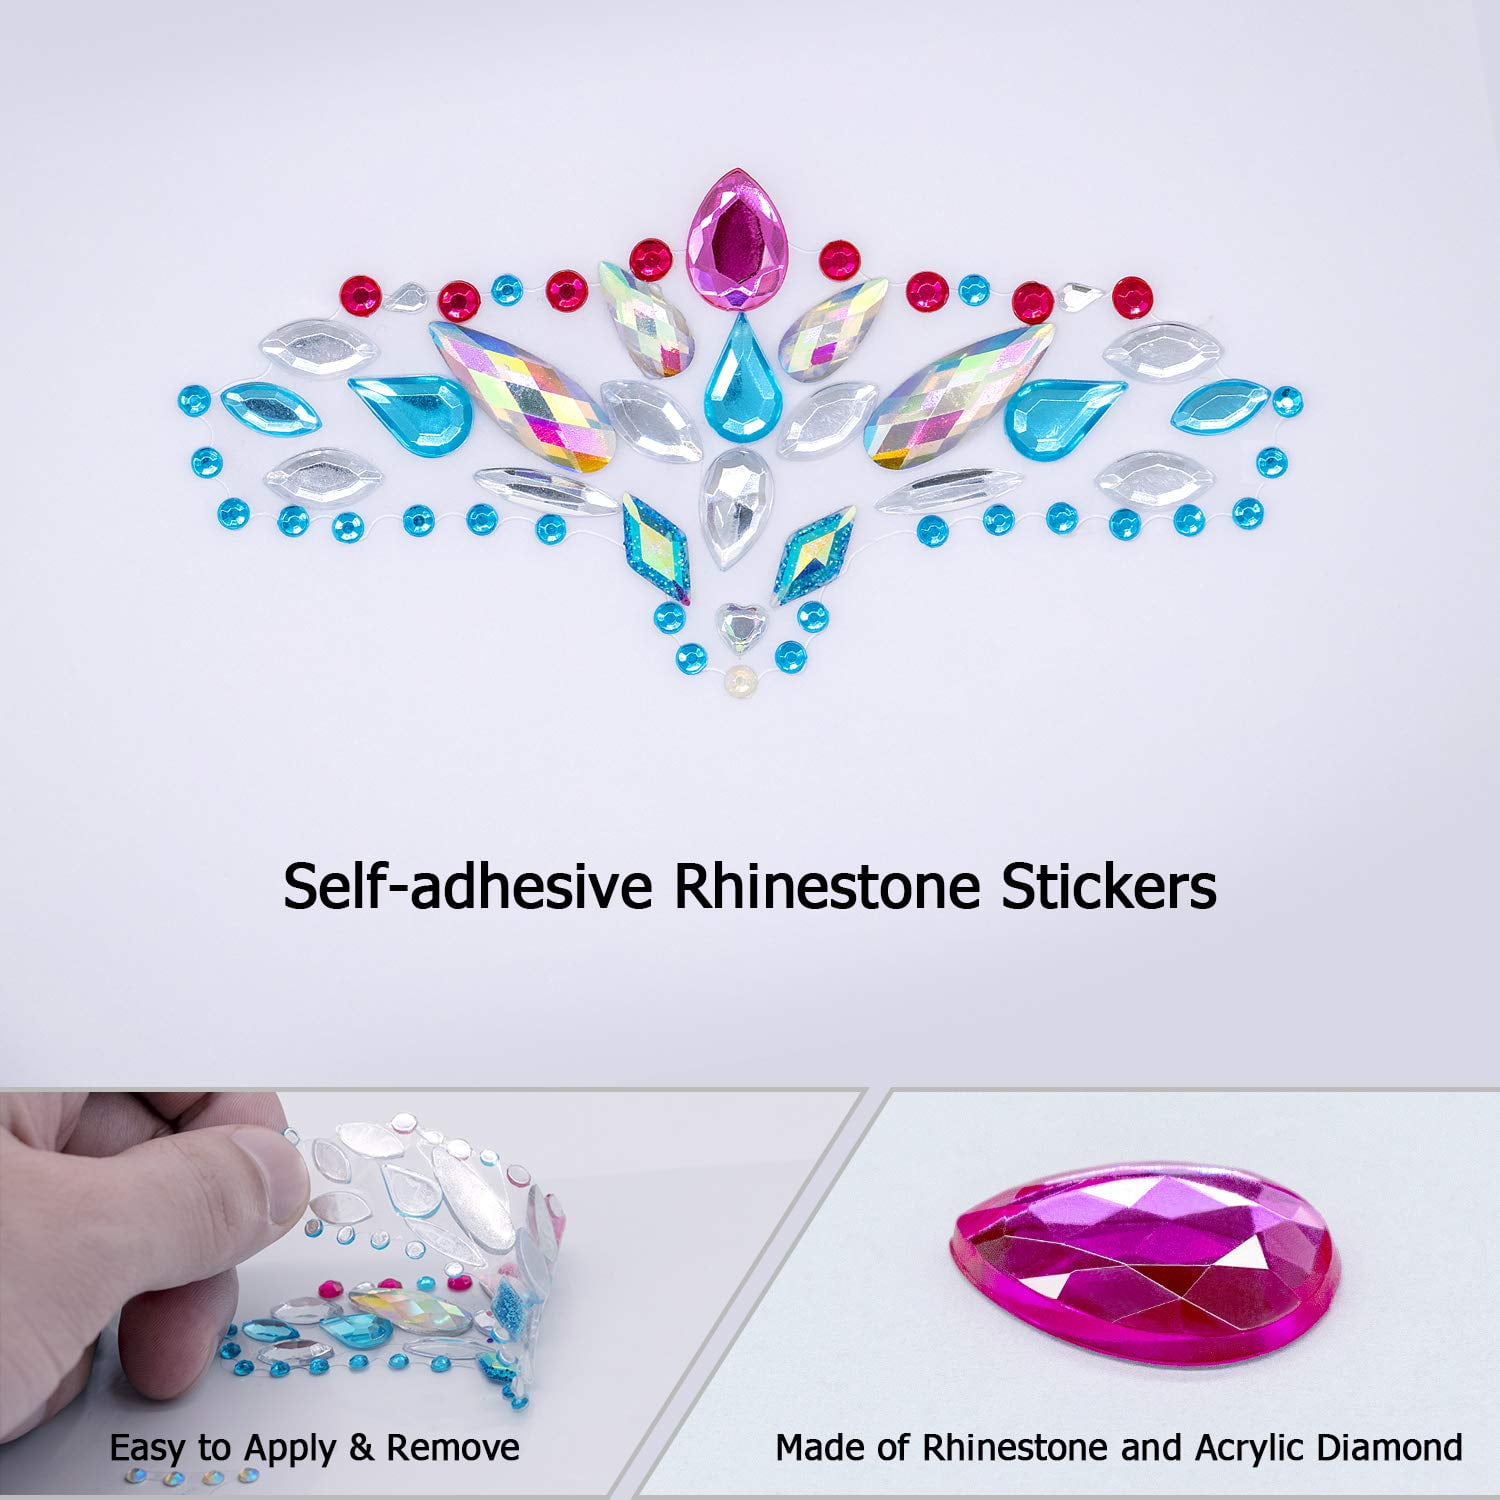 Festival Face Jewels Sticker, 3-Color Mermaid Tear Face Gems Glitter Tattoo  for Eye Corner and Forehead, Bindi Rhinestone Face Jewelry Rave Party